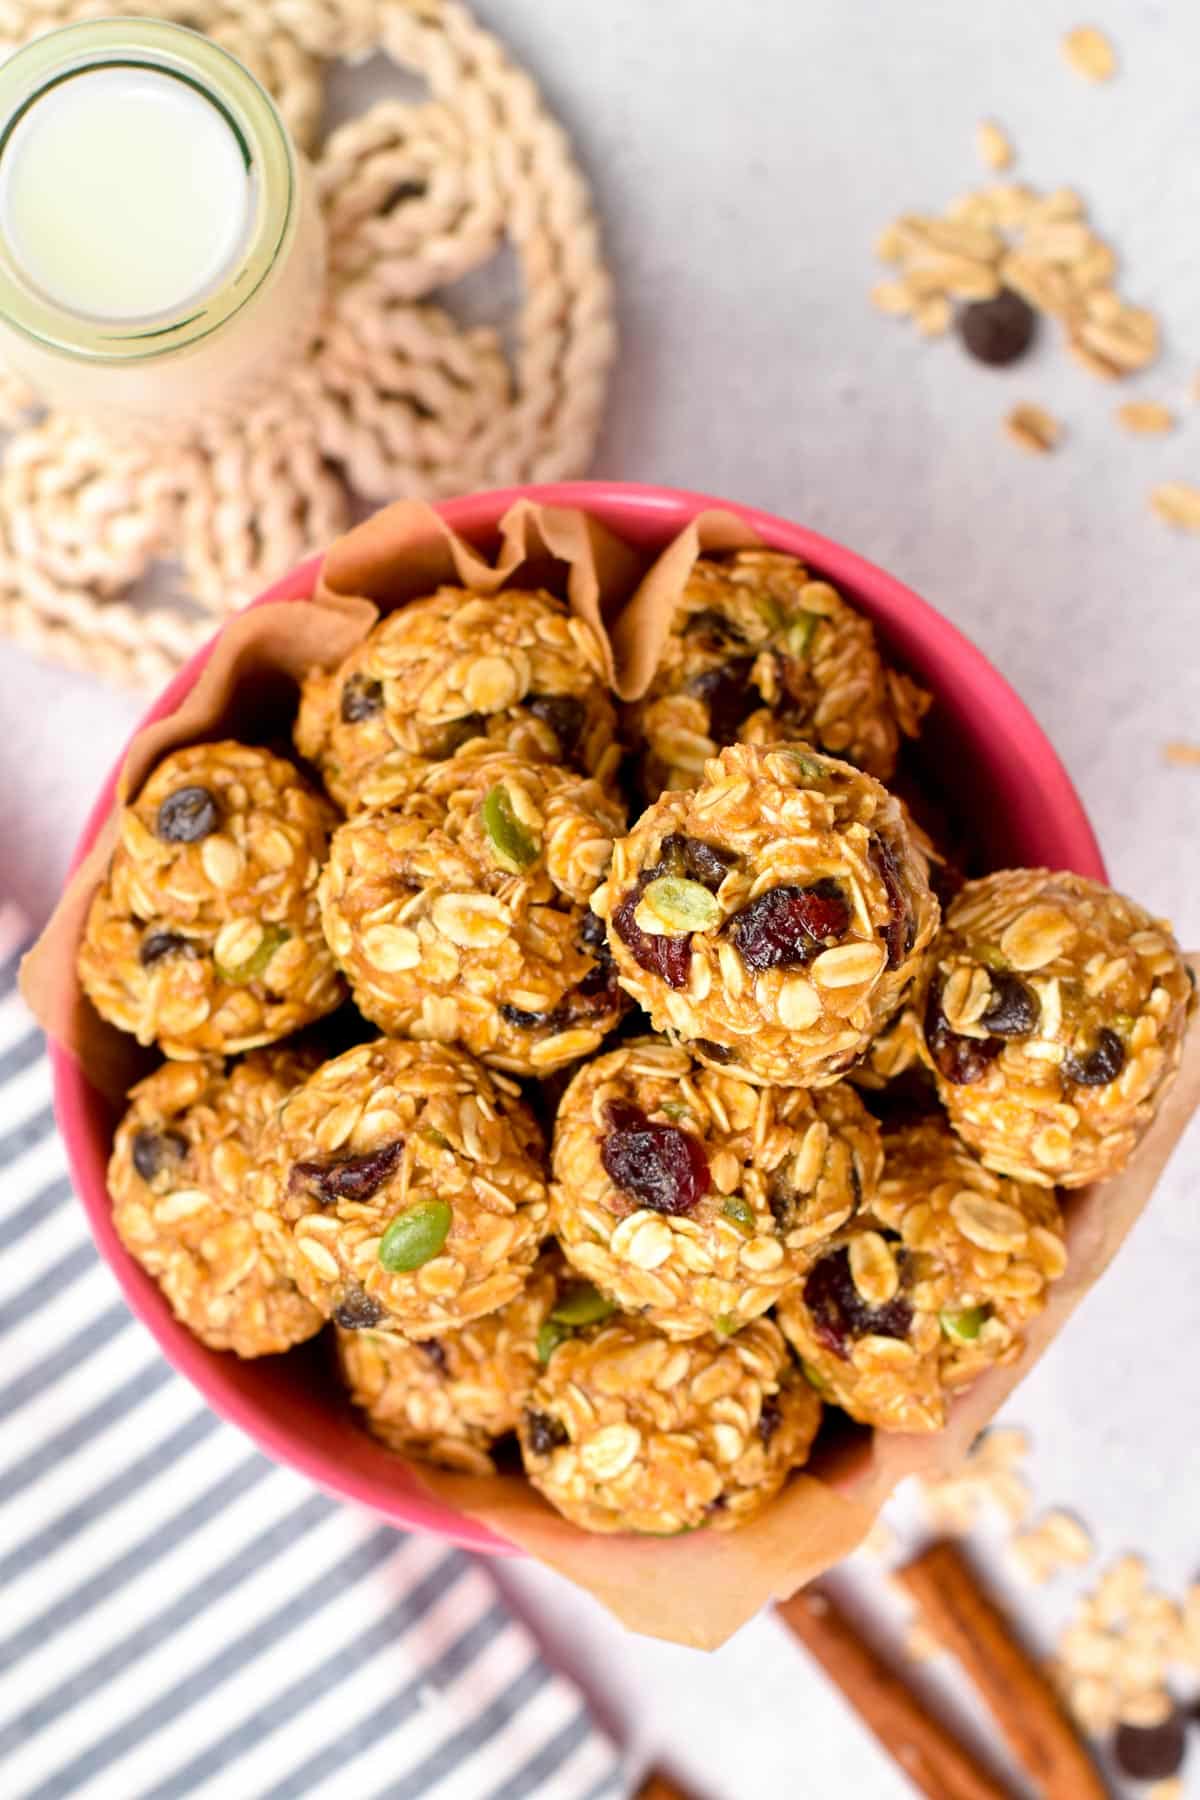 These No Bake Peanut Butter Oatmeal Balls are easy, healthy and quick snacks to fix your sweet cravings and adds fiber, proteins to your day. Plus, these no bake oatmeal balls takes barely 20 minutes to make and they are allergy friendly, vegan and dairy-free too.